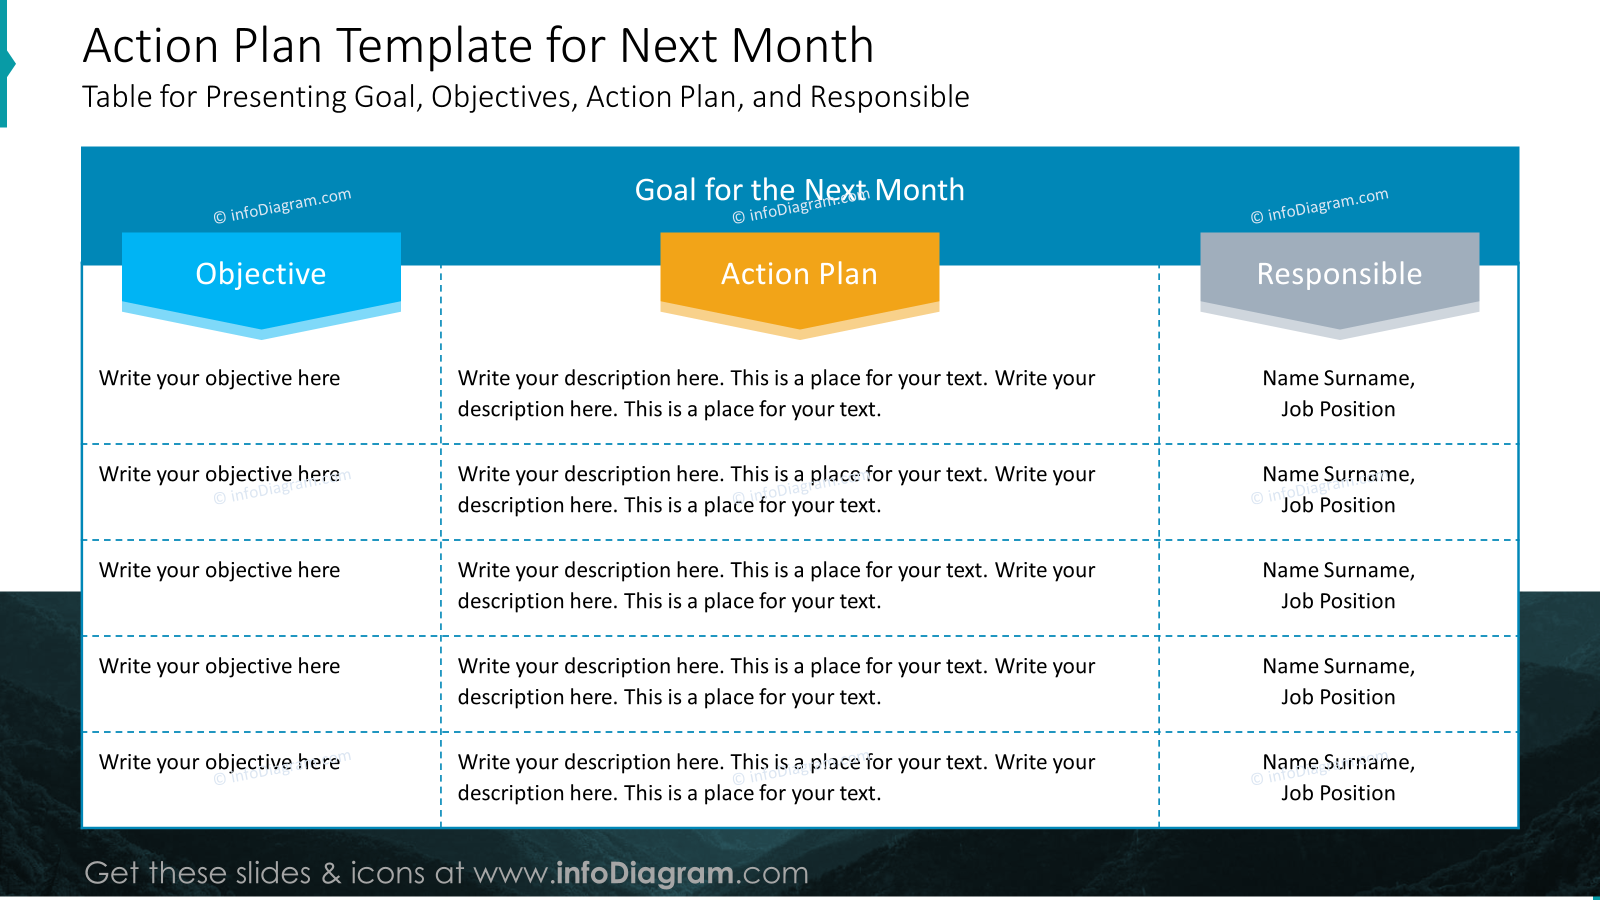 action-plan-template-for-next-month-table